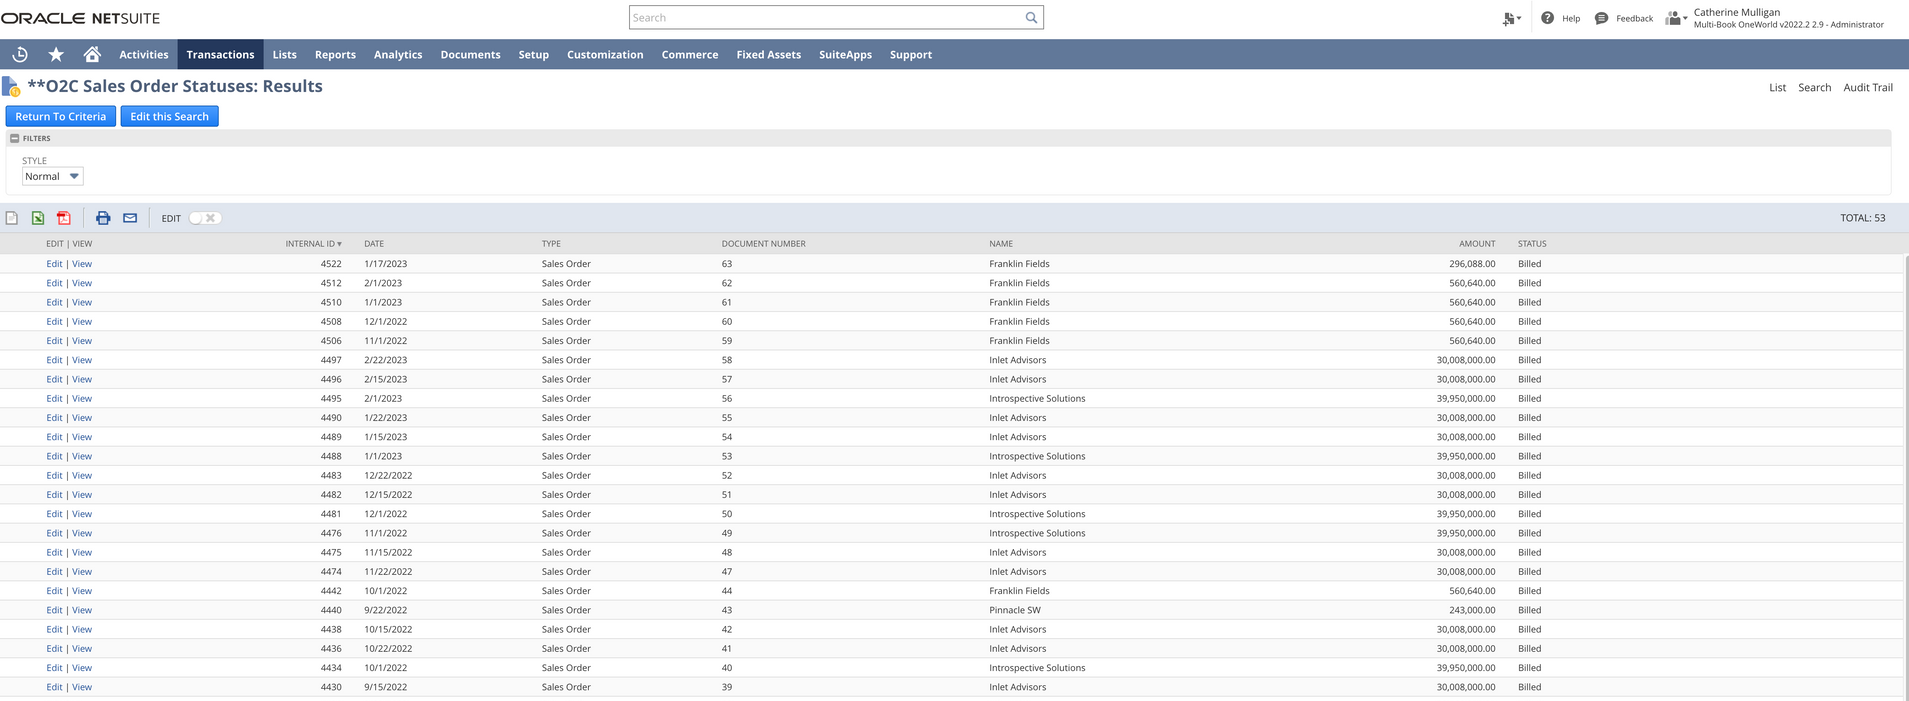 This is a screenshot example of a NetSuite saved search display sales order statuses.